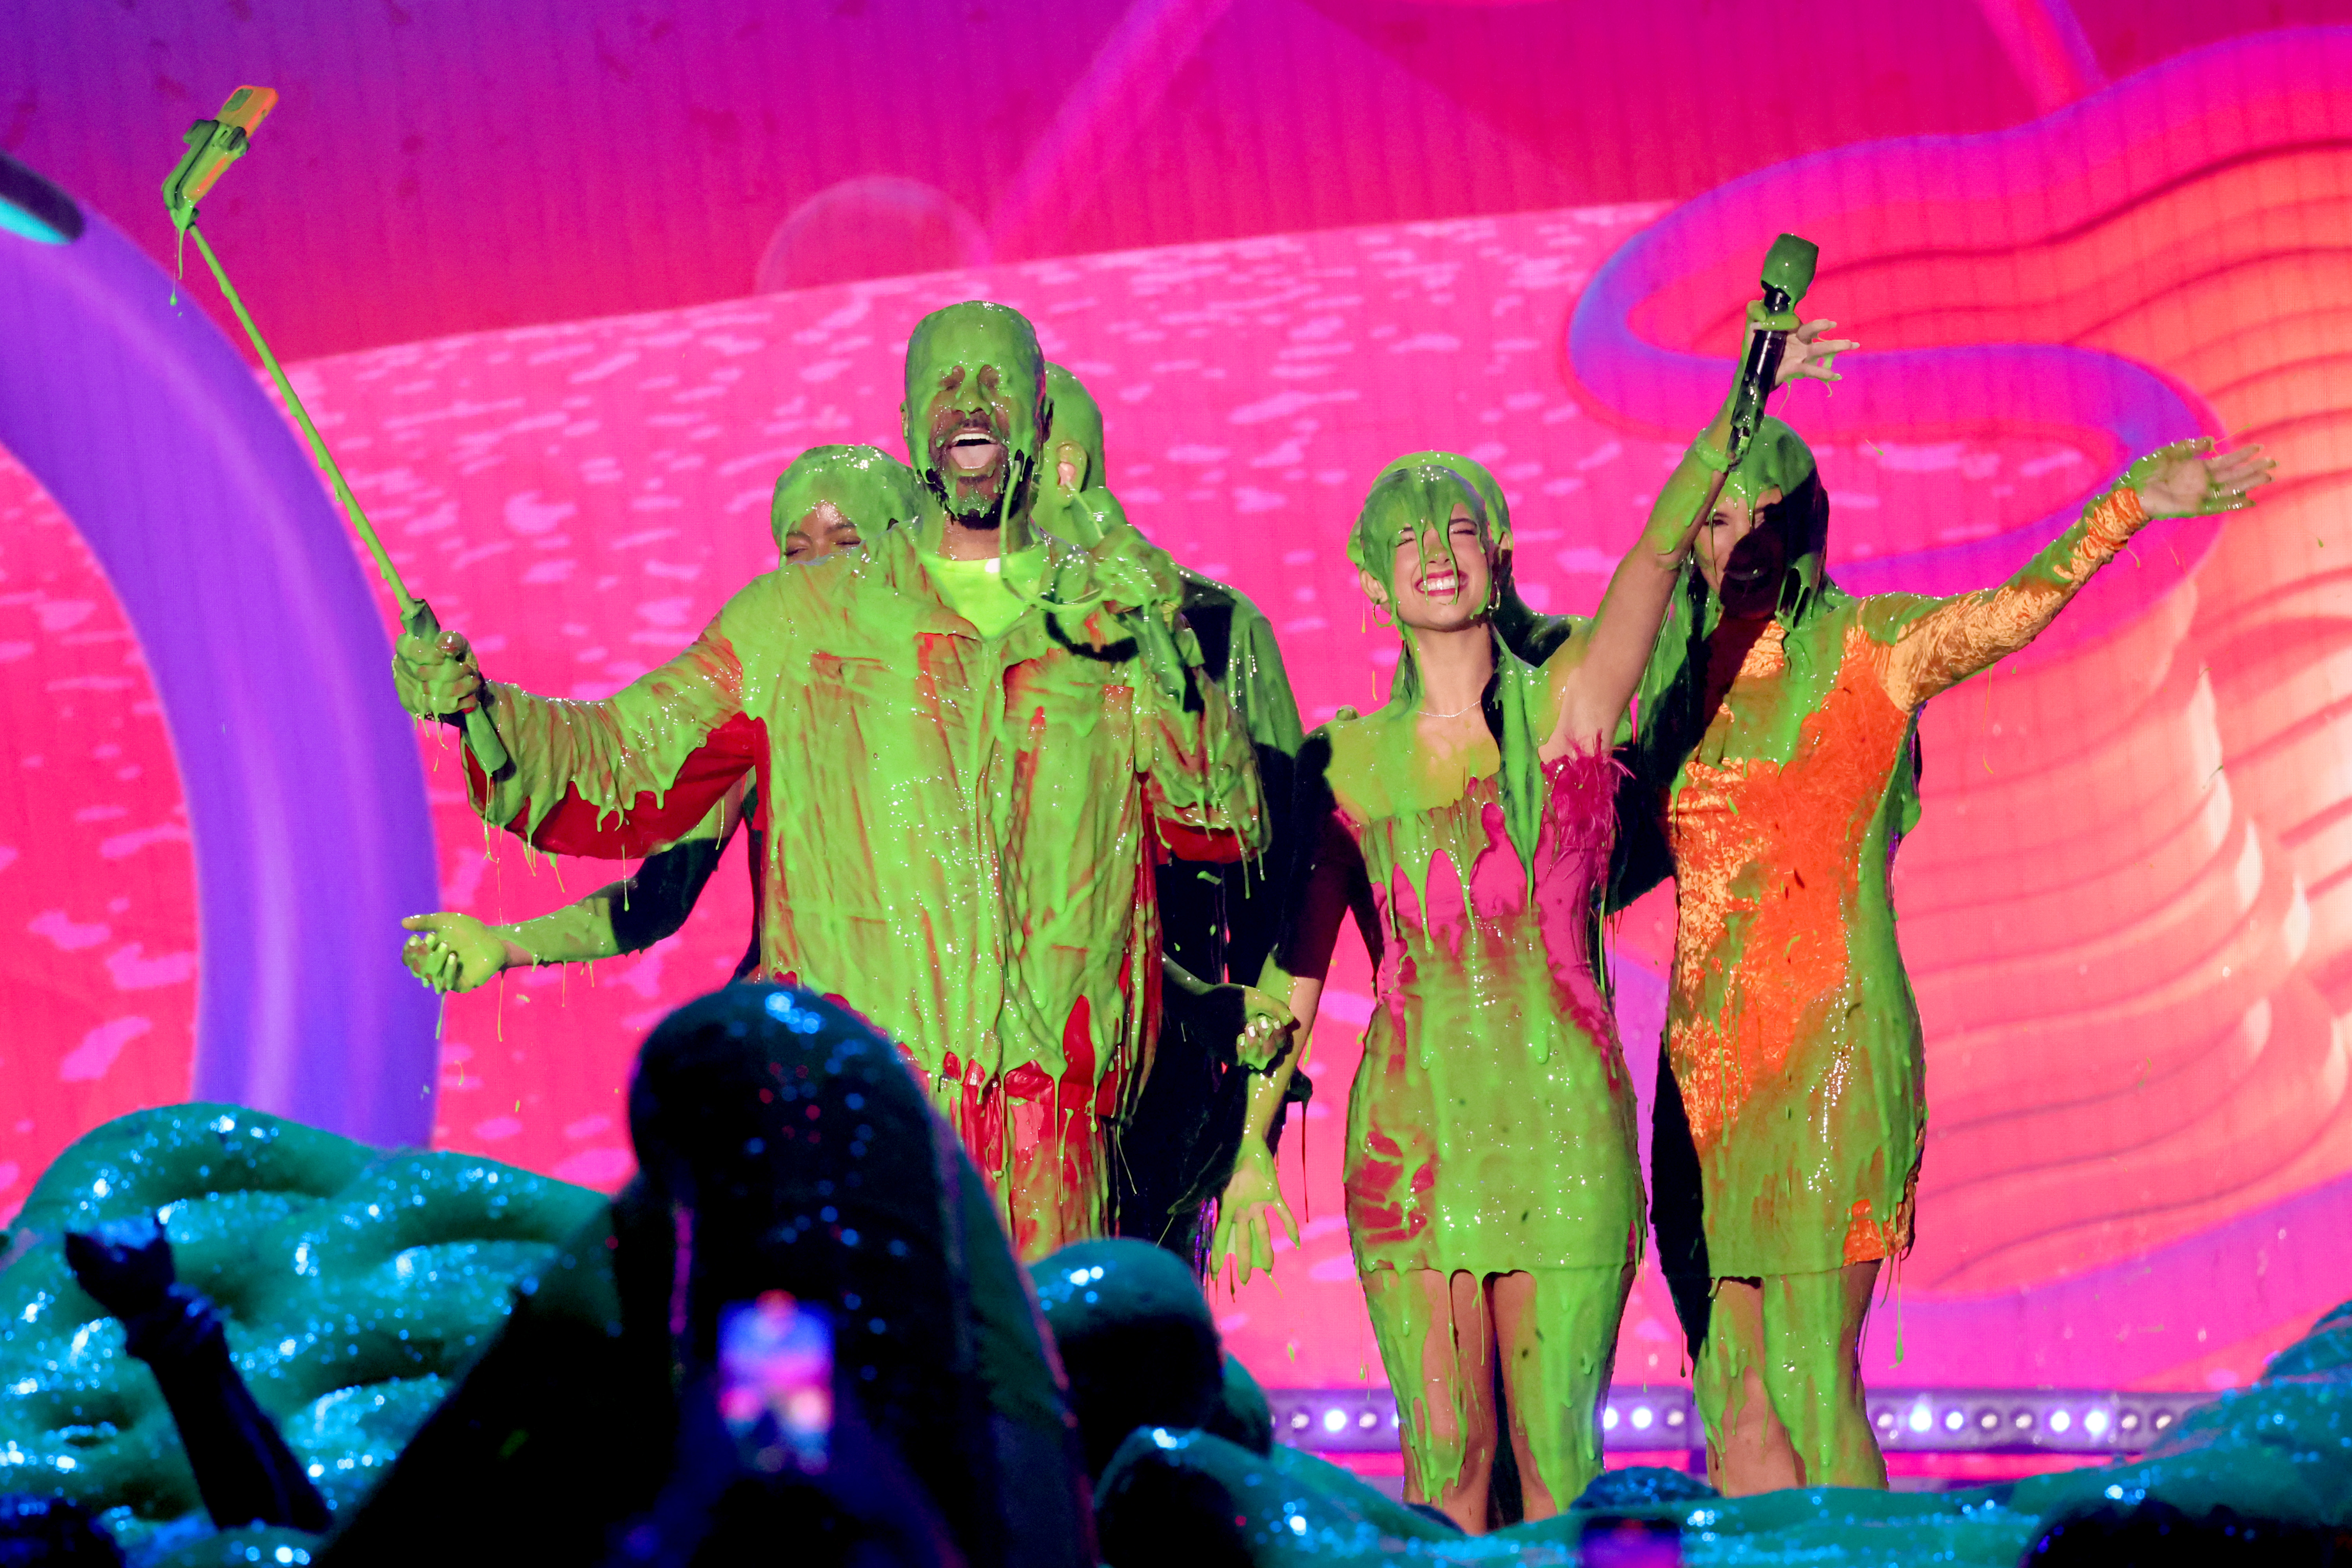 Mia Burleson, Nate Burleson, Marc D'Amelio, Charli D'Amelio, and Heidi D'Amelio speak onstage during the 2023 Nickelodeon Kids' Choice Awards at Microsoft Theater on March 04, 2023 in Los Angeles. (Photo by Monica Schipper/Getty Images for Nickelodeon)